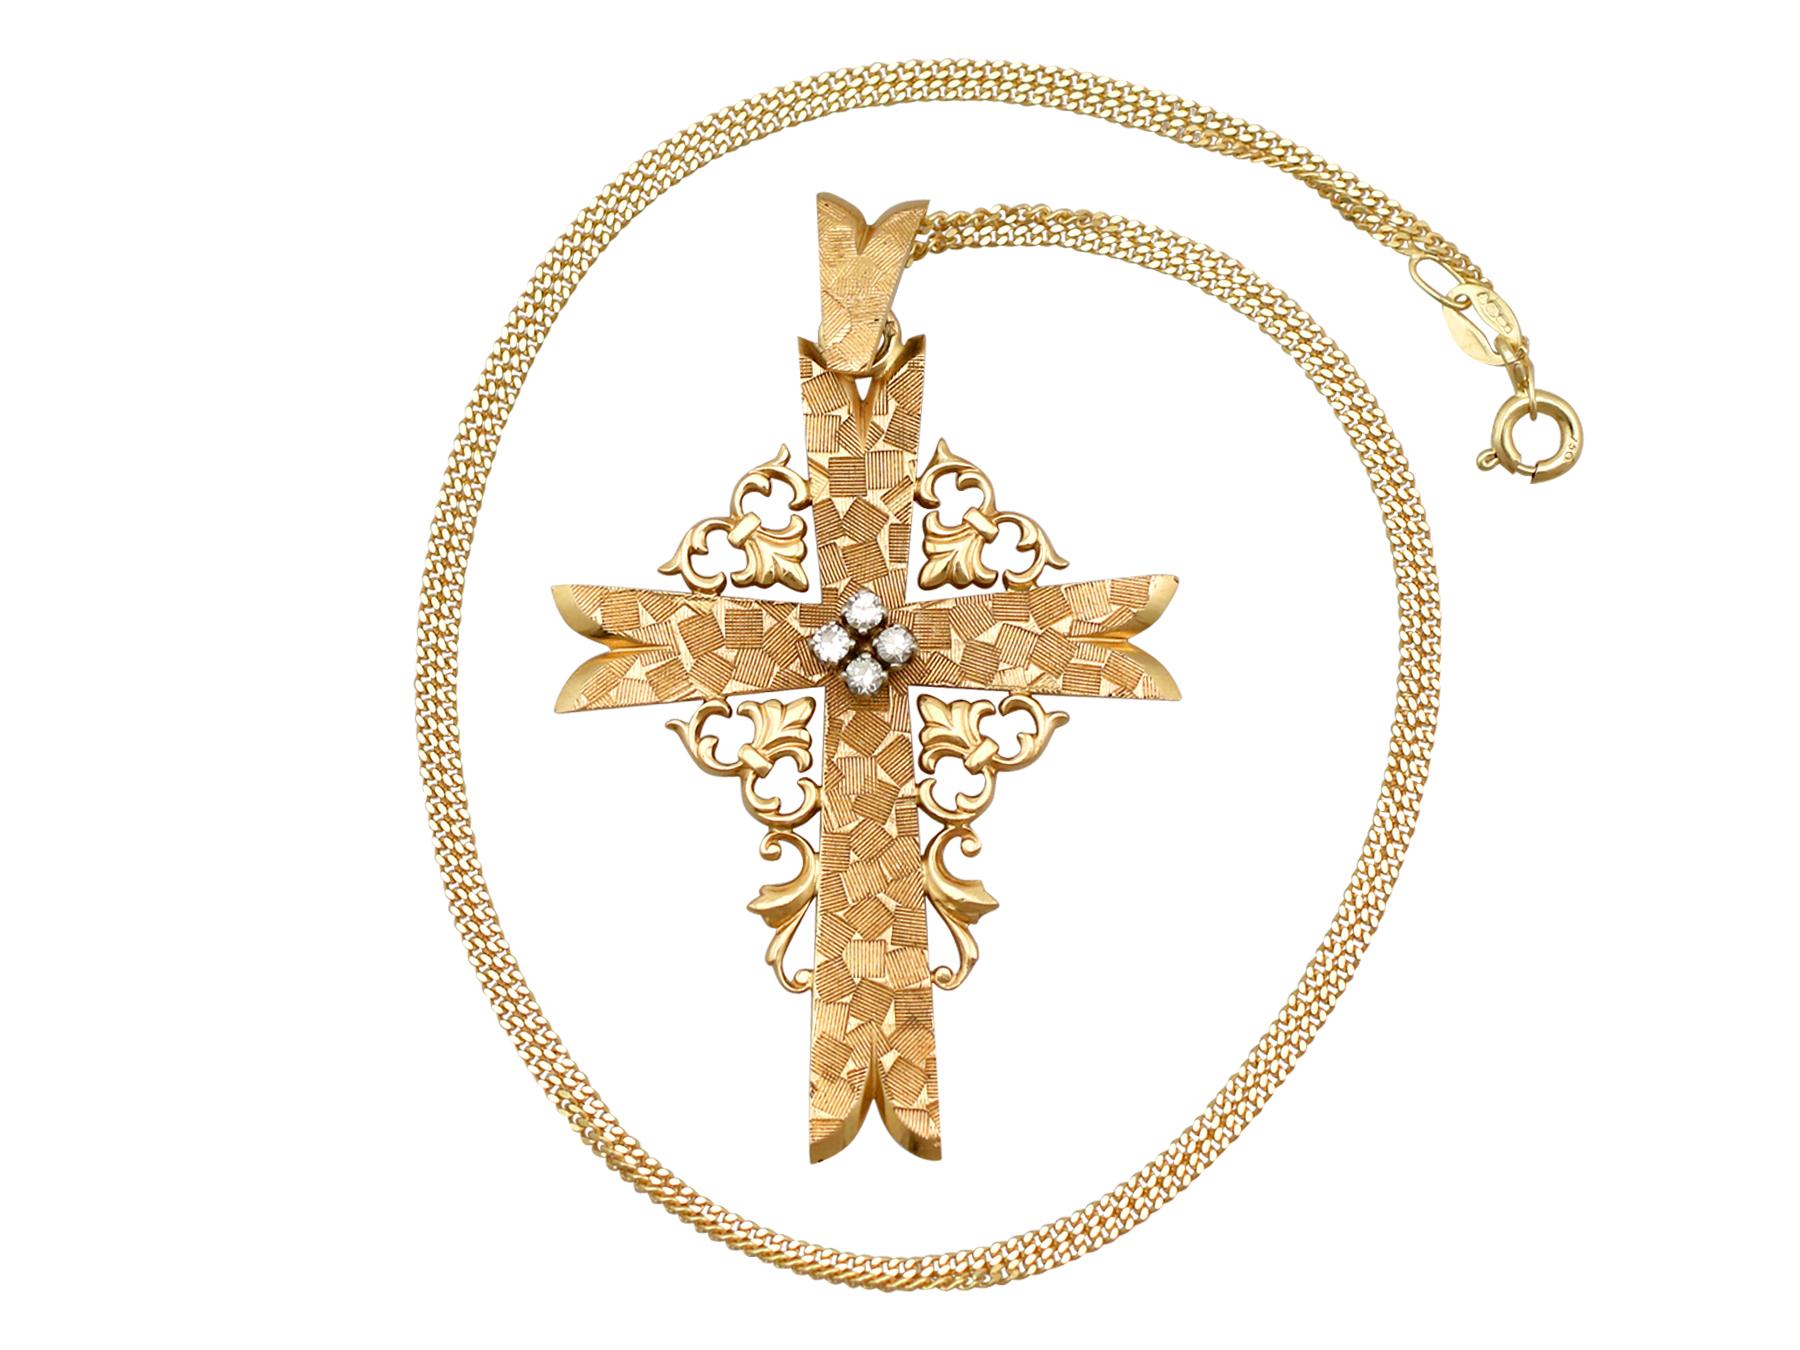 An impressive vintage French 0.12 carat diamond and 18 karat yellow gold, 18 karat white gold cross pendant; part of our diverse diamond jewelry and estate jewelry collections.

This fine and impressive vintage diamond pendant has been crafted in